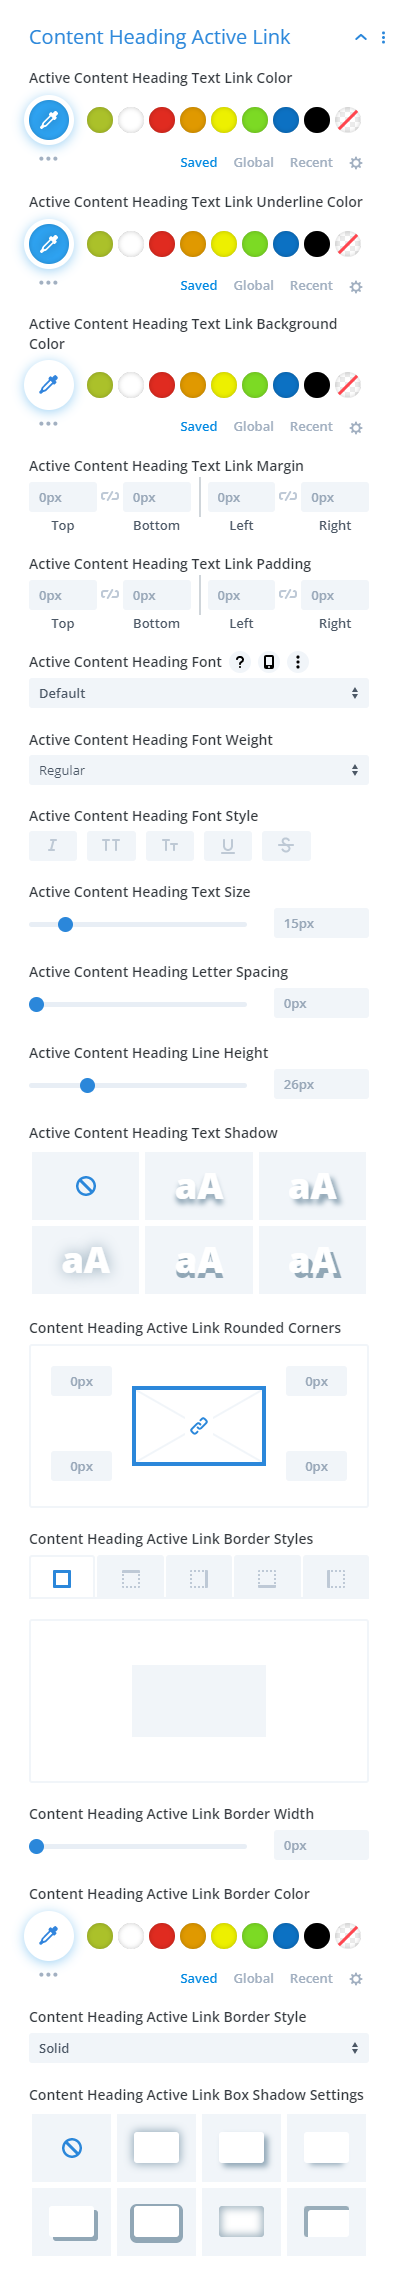 content heading active link settings in the Divi Table of Contents Maker module plugin 1.2 by Pee Aye Creative